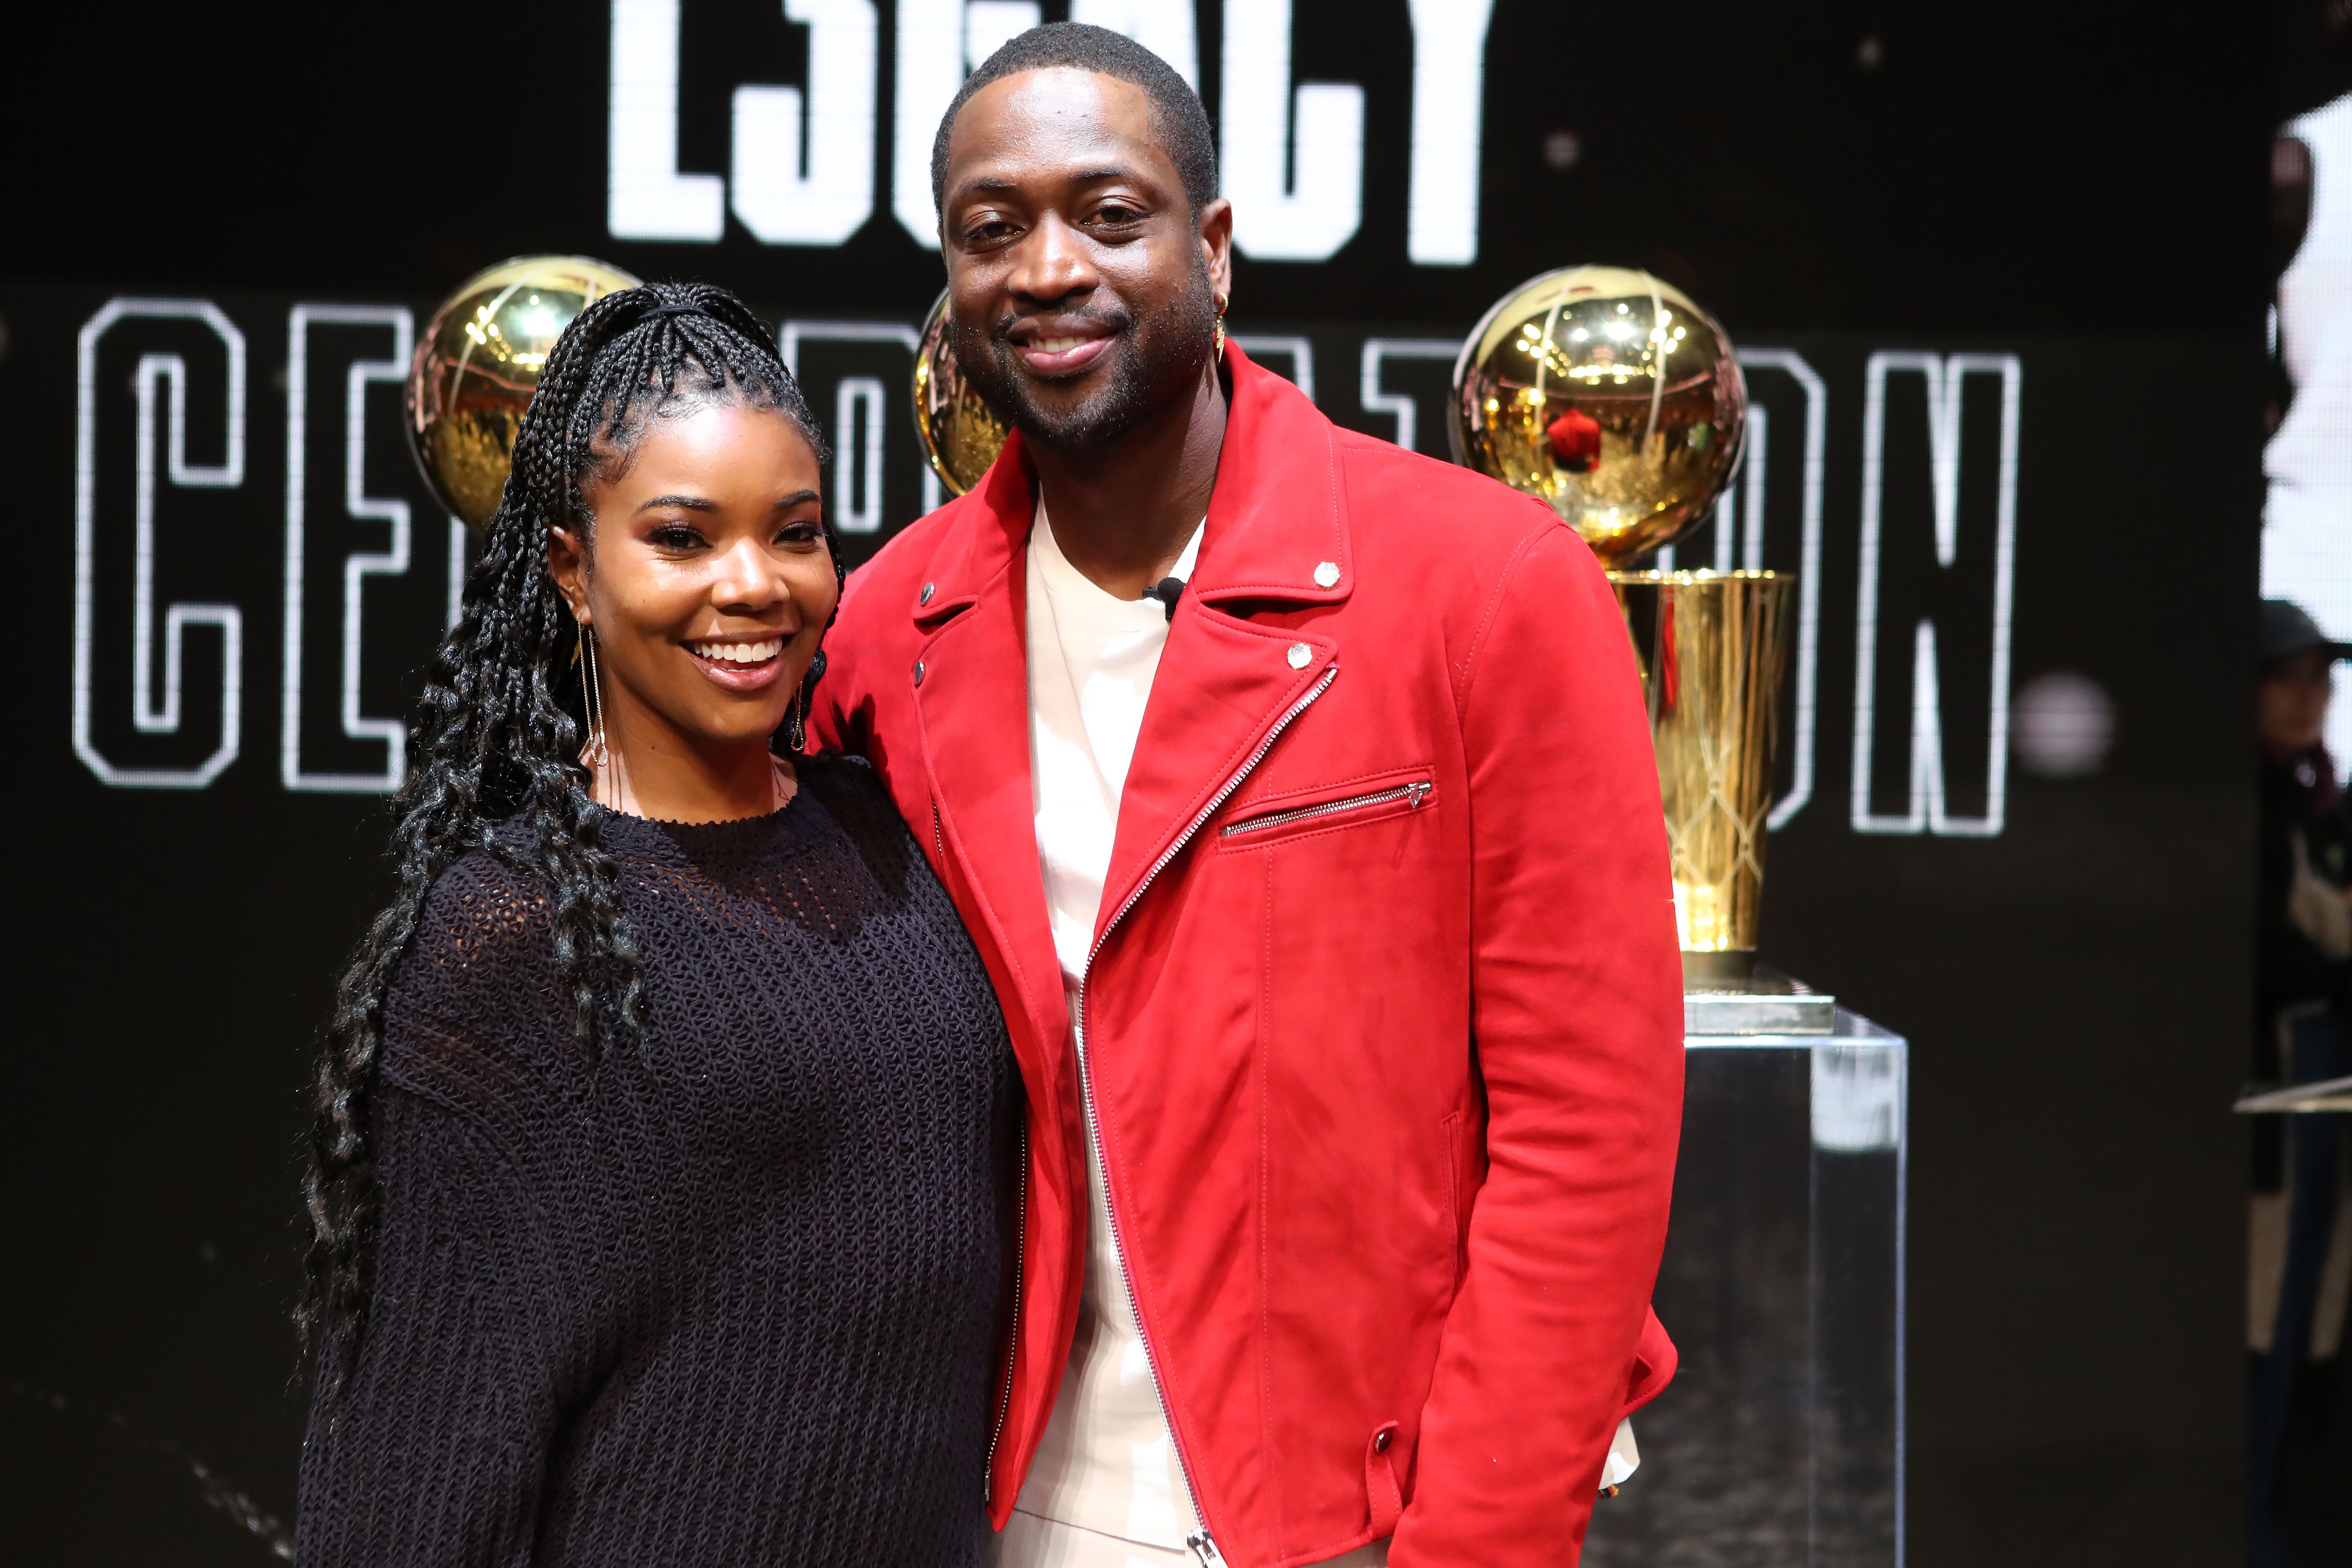 Dwyane Wade with his wife Gabrielle Union at the Jersey Retirement Flashback Event on February 21, 2020 in Miami. | Photo : Getty Images